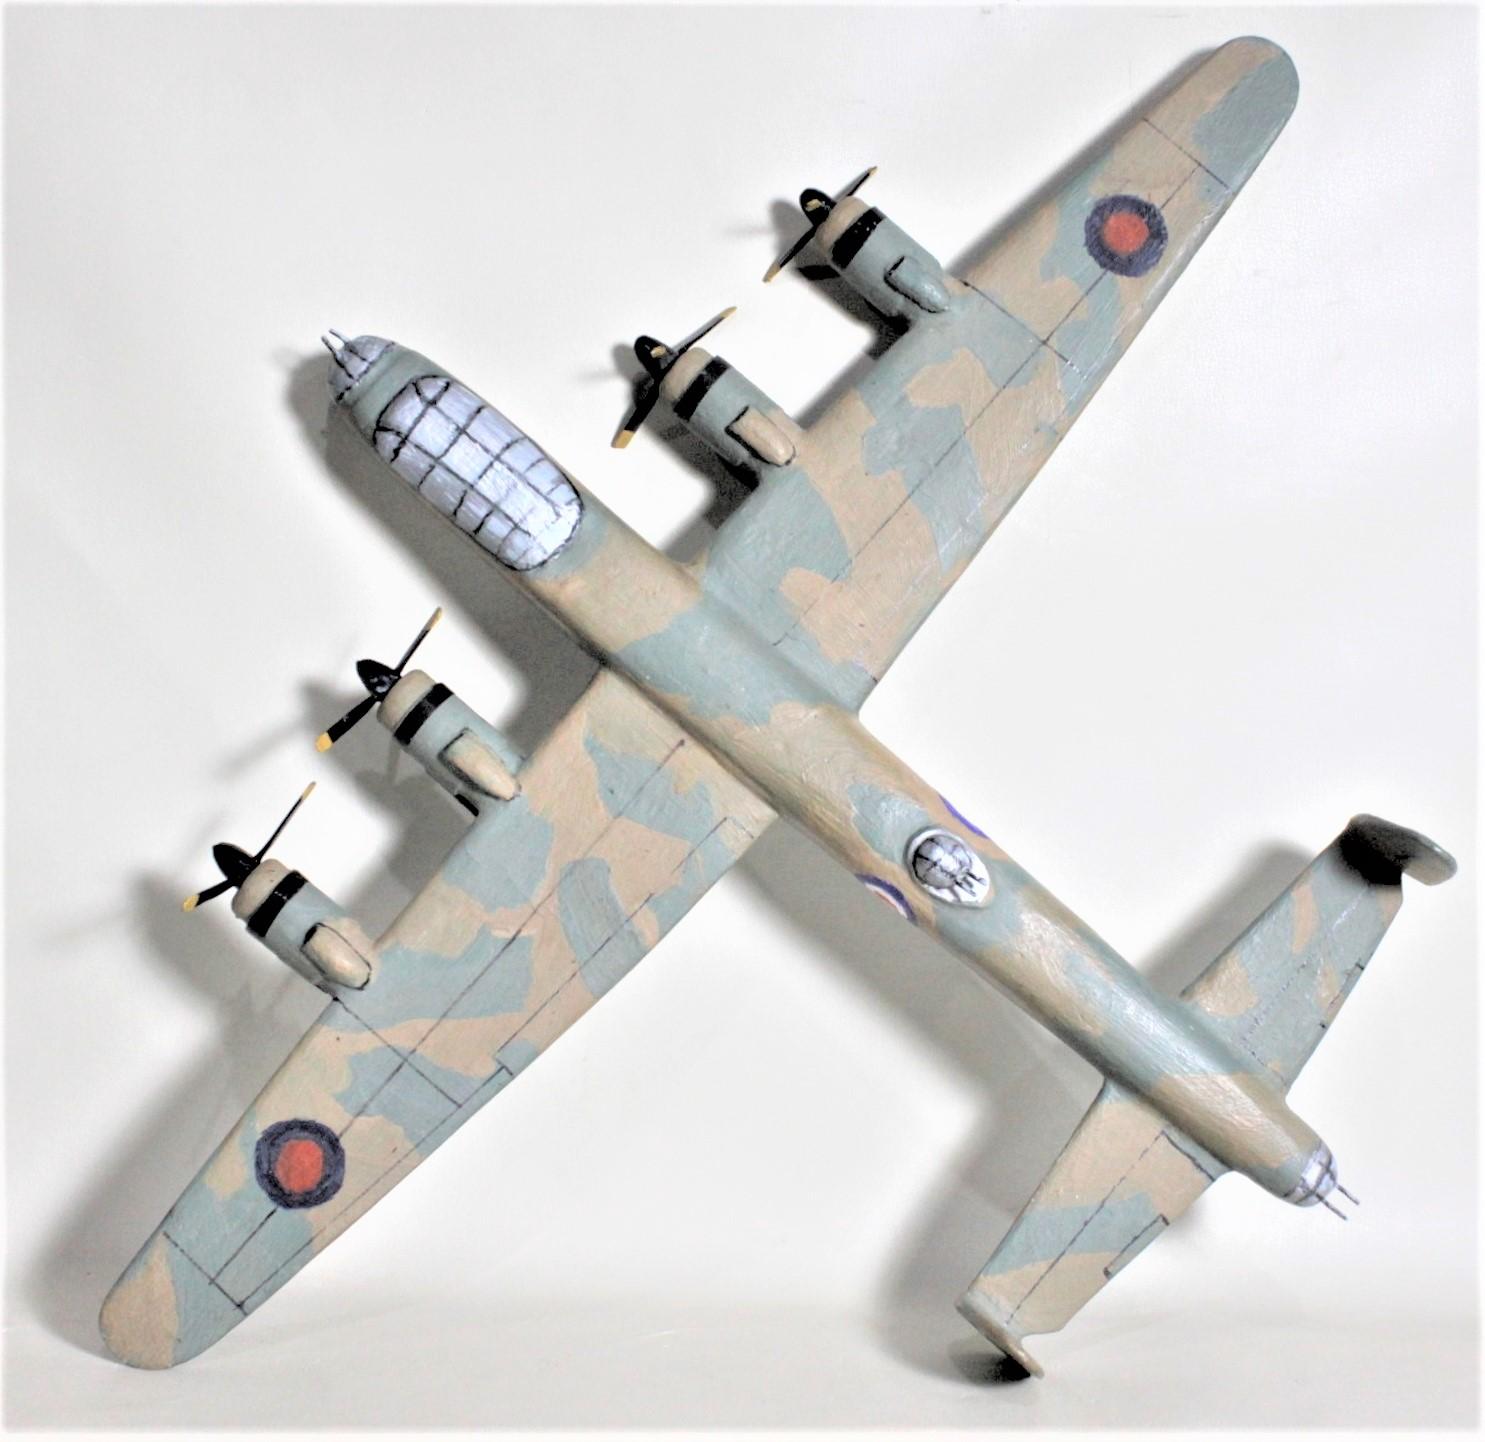 Softwood Folk Art Wooden Hand Carved and Painted WW2 Lancaster Bomber Model Airplane For Sale